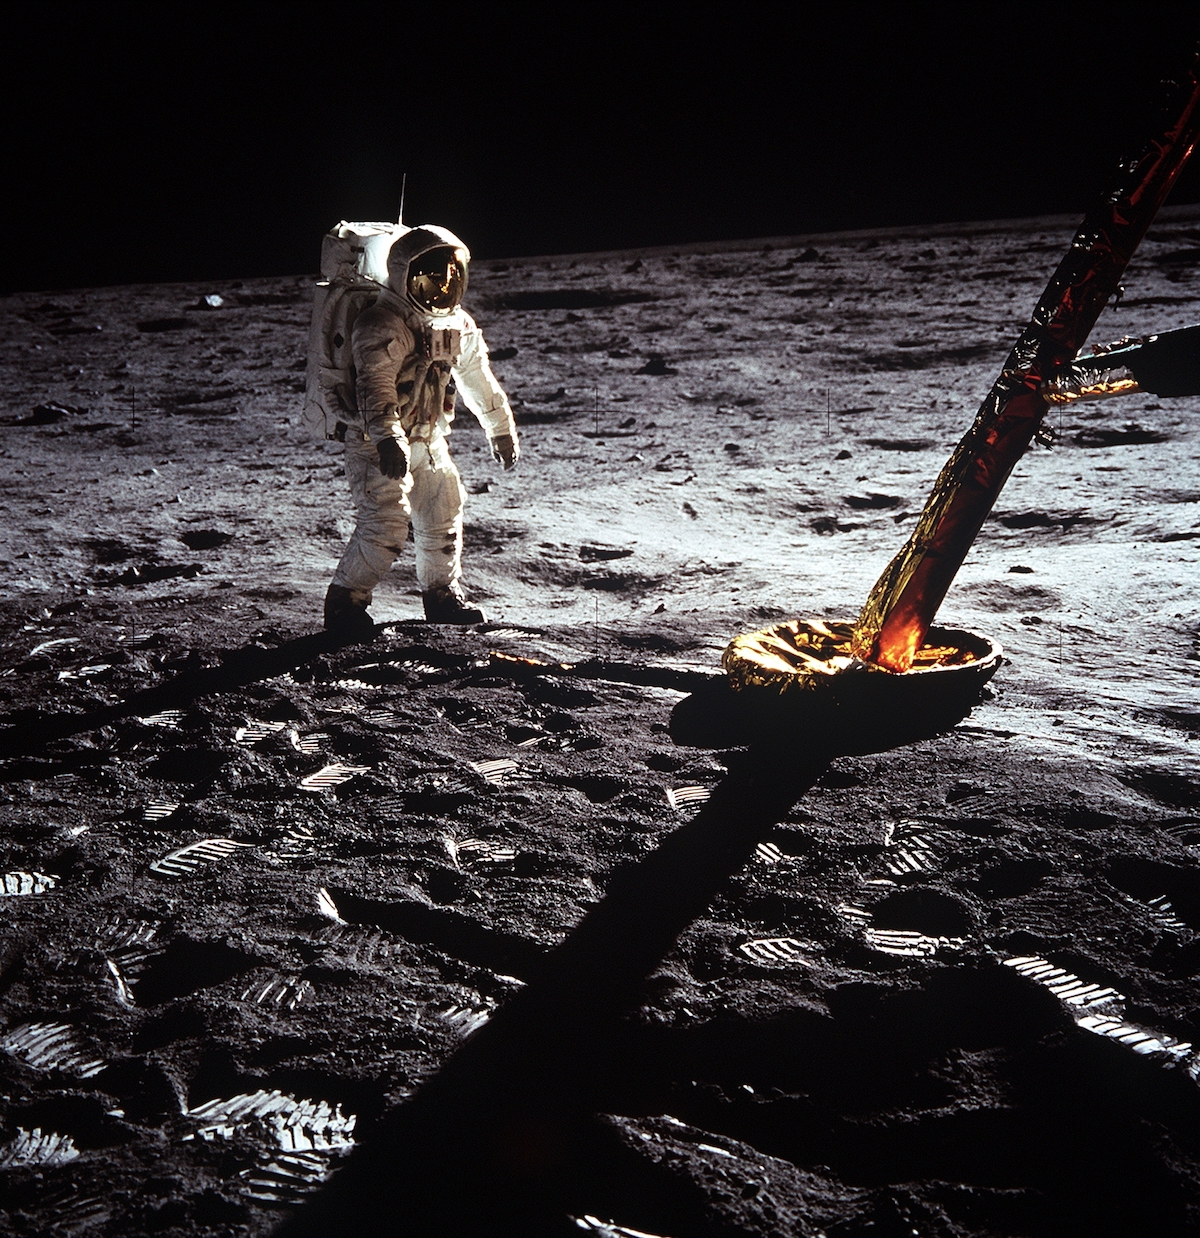 astronaut on the surface of the Moon, next to a lander leg of the lunar module